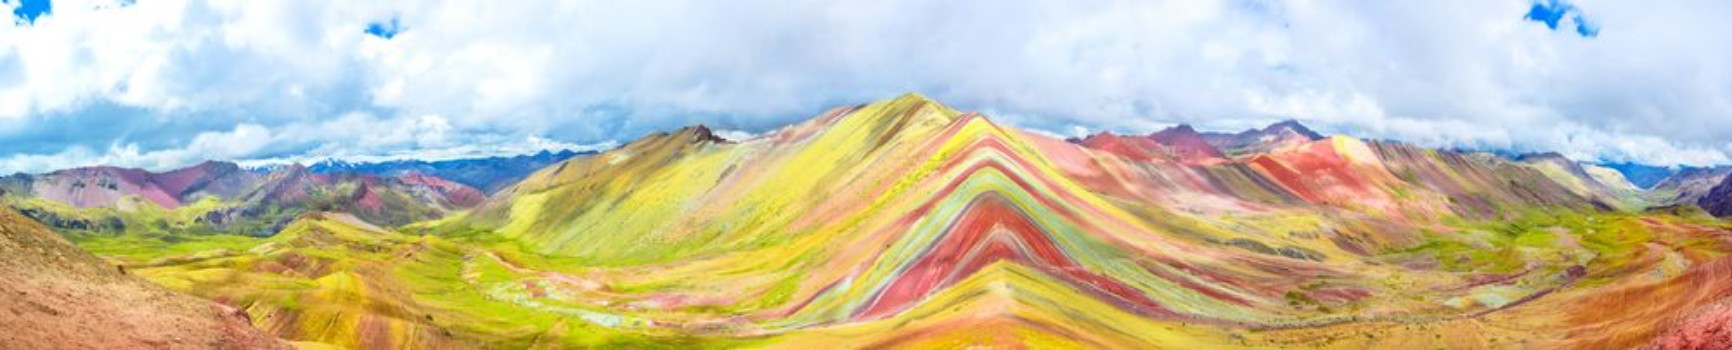 Picture of Vinicunca or Rainbow MountainPitumarca Peru